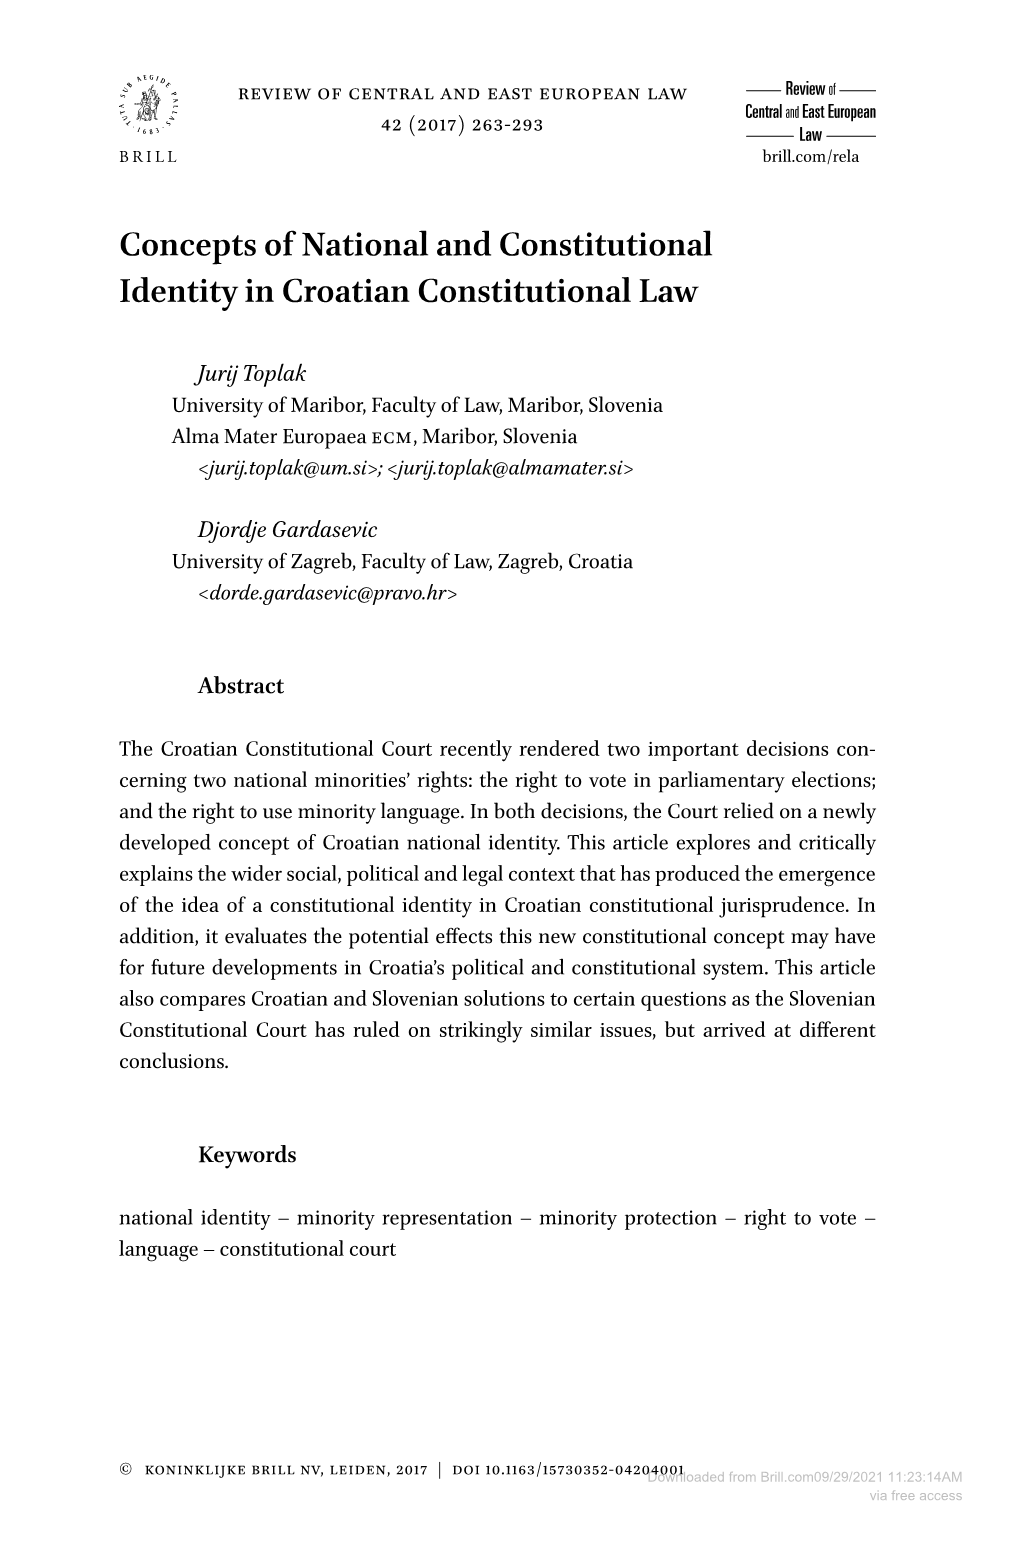 Concepts of National and Constitutional Identity in Croatian Constitutional Law